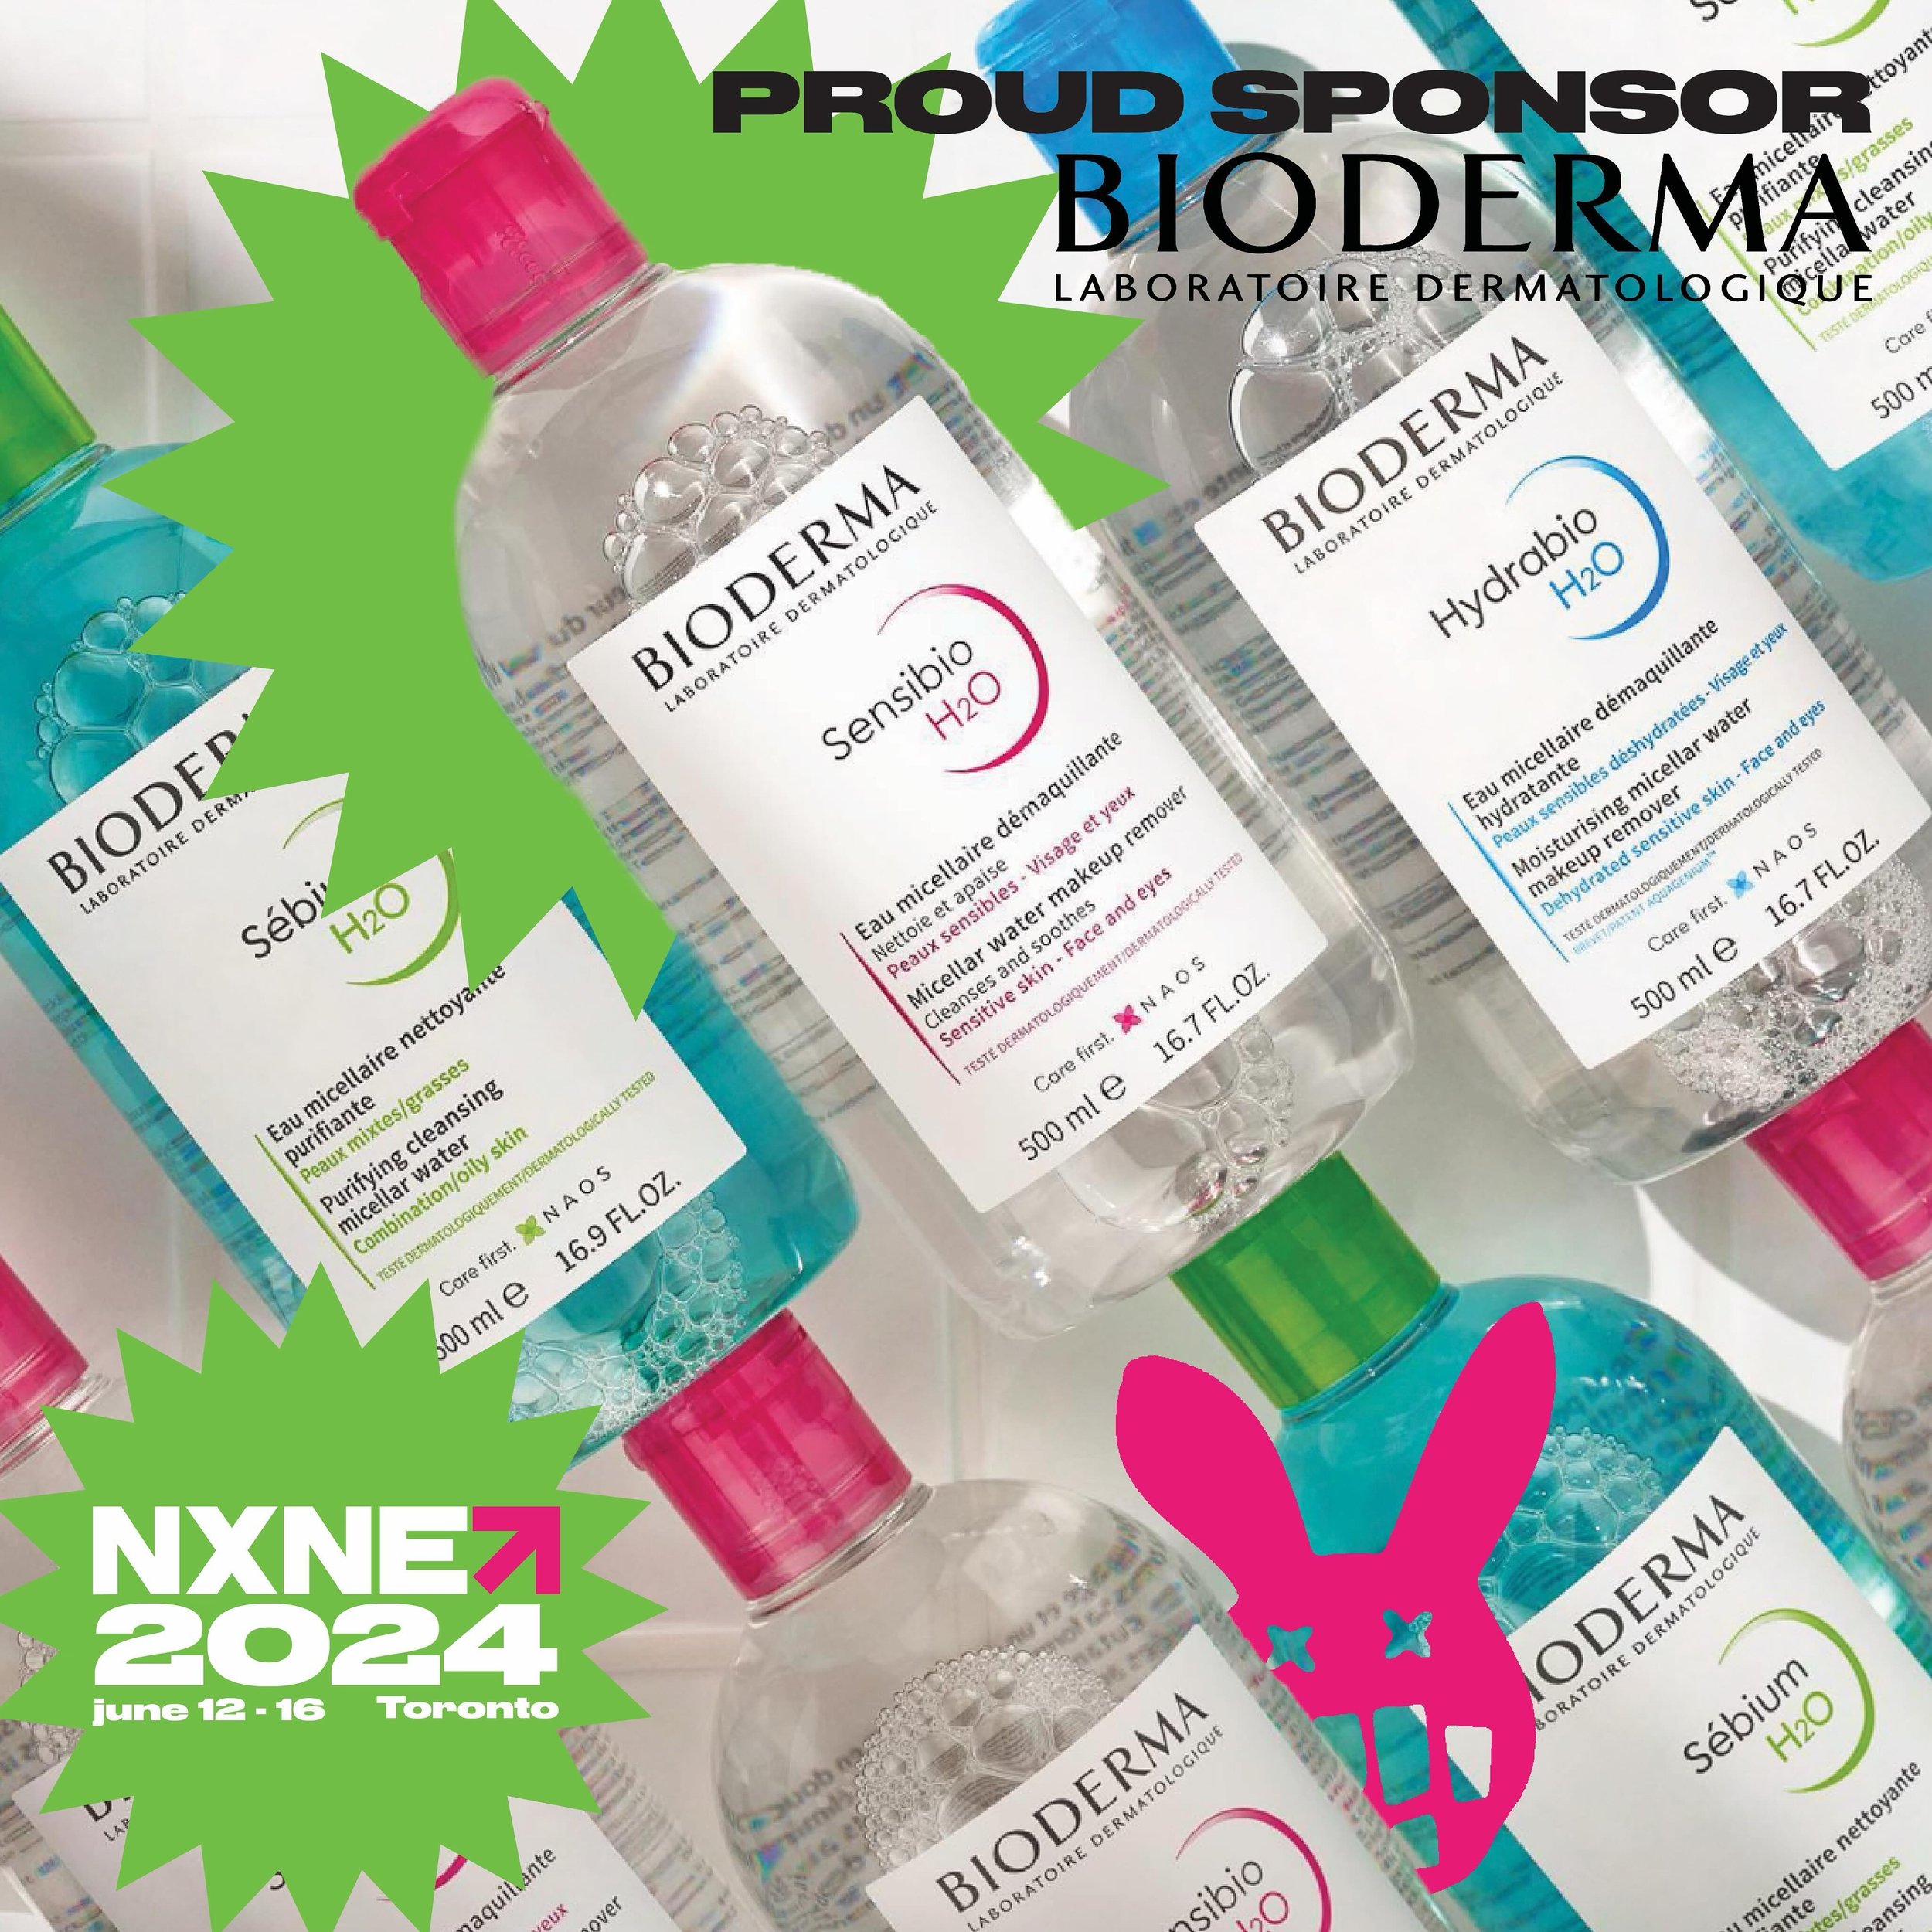 Ready to get your glow on? ✨
 
We are thrilled to announce our proud #NXNE2024 sponsor @biodermacanada will be hanging out with us at @itsok.world and the Queen West Day Party this festival season. Catch them handing out samples, snapping pictures wi